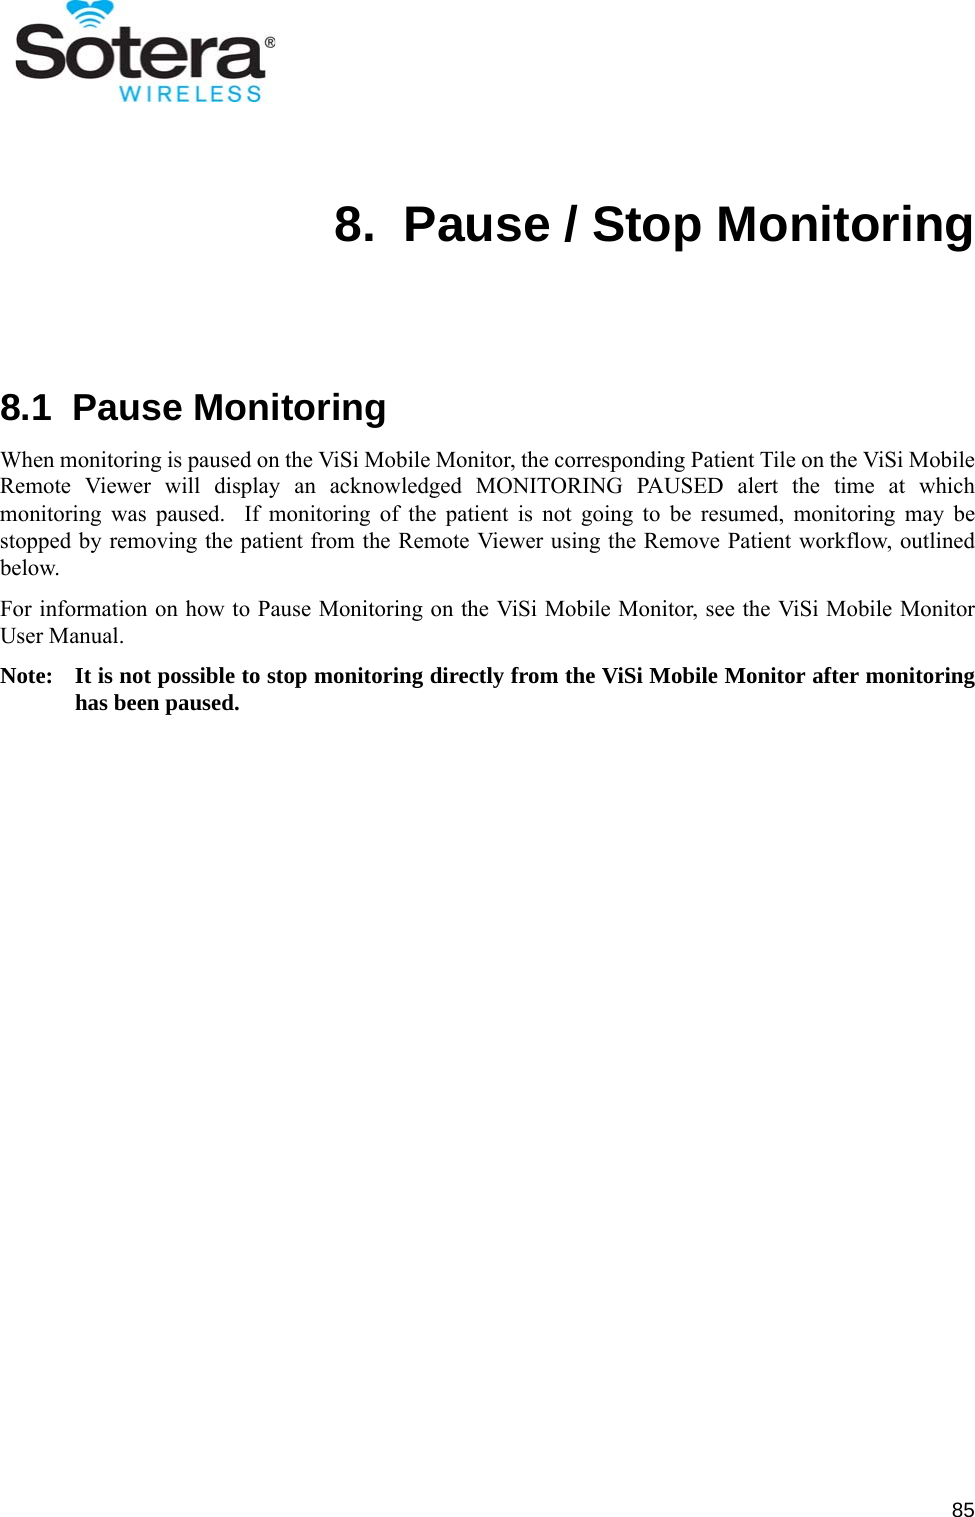 858.  Pause / Stop Monitoring8.1  Pause MonitoringWhen monitoring is paused on the ViSi Mobile Monitor, the corresponding Patient Tile on the ViSi MobileRemote Viewer will display an acknowledged MONITORING PAUSED alert the time at whichmonitoring was paused.  If monitoring of the patient is not going to be resumed, monitoring may bestopped by removing the patient from the Remote Viewer using the Remove Patient workflow, outlinedbelow.For information on how to Pause Monitoring on the ViSi Mobile Monitor, see the ViSi Mobile MonitorUser Manual.Note: It is not possible to stop monitoring directly from the ViSi Mobile Monitor after monitoringhas been paused.